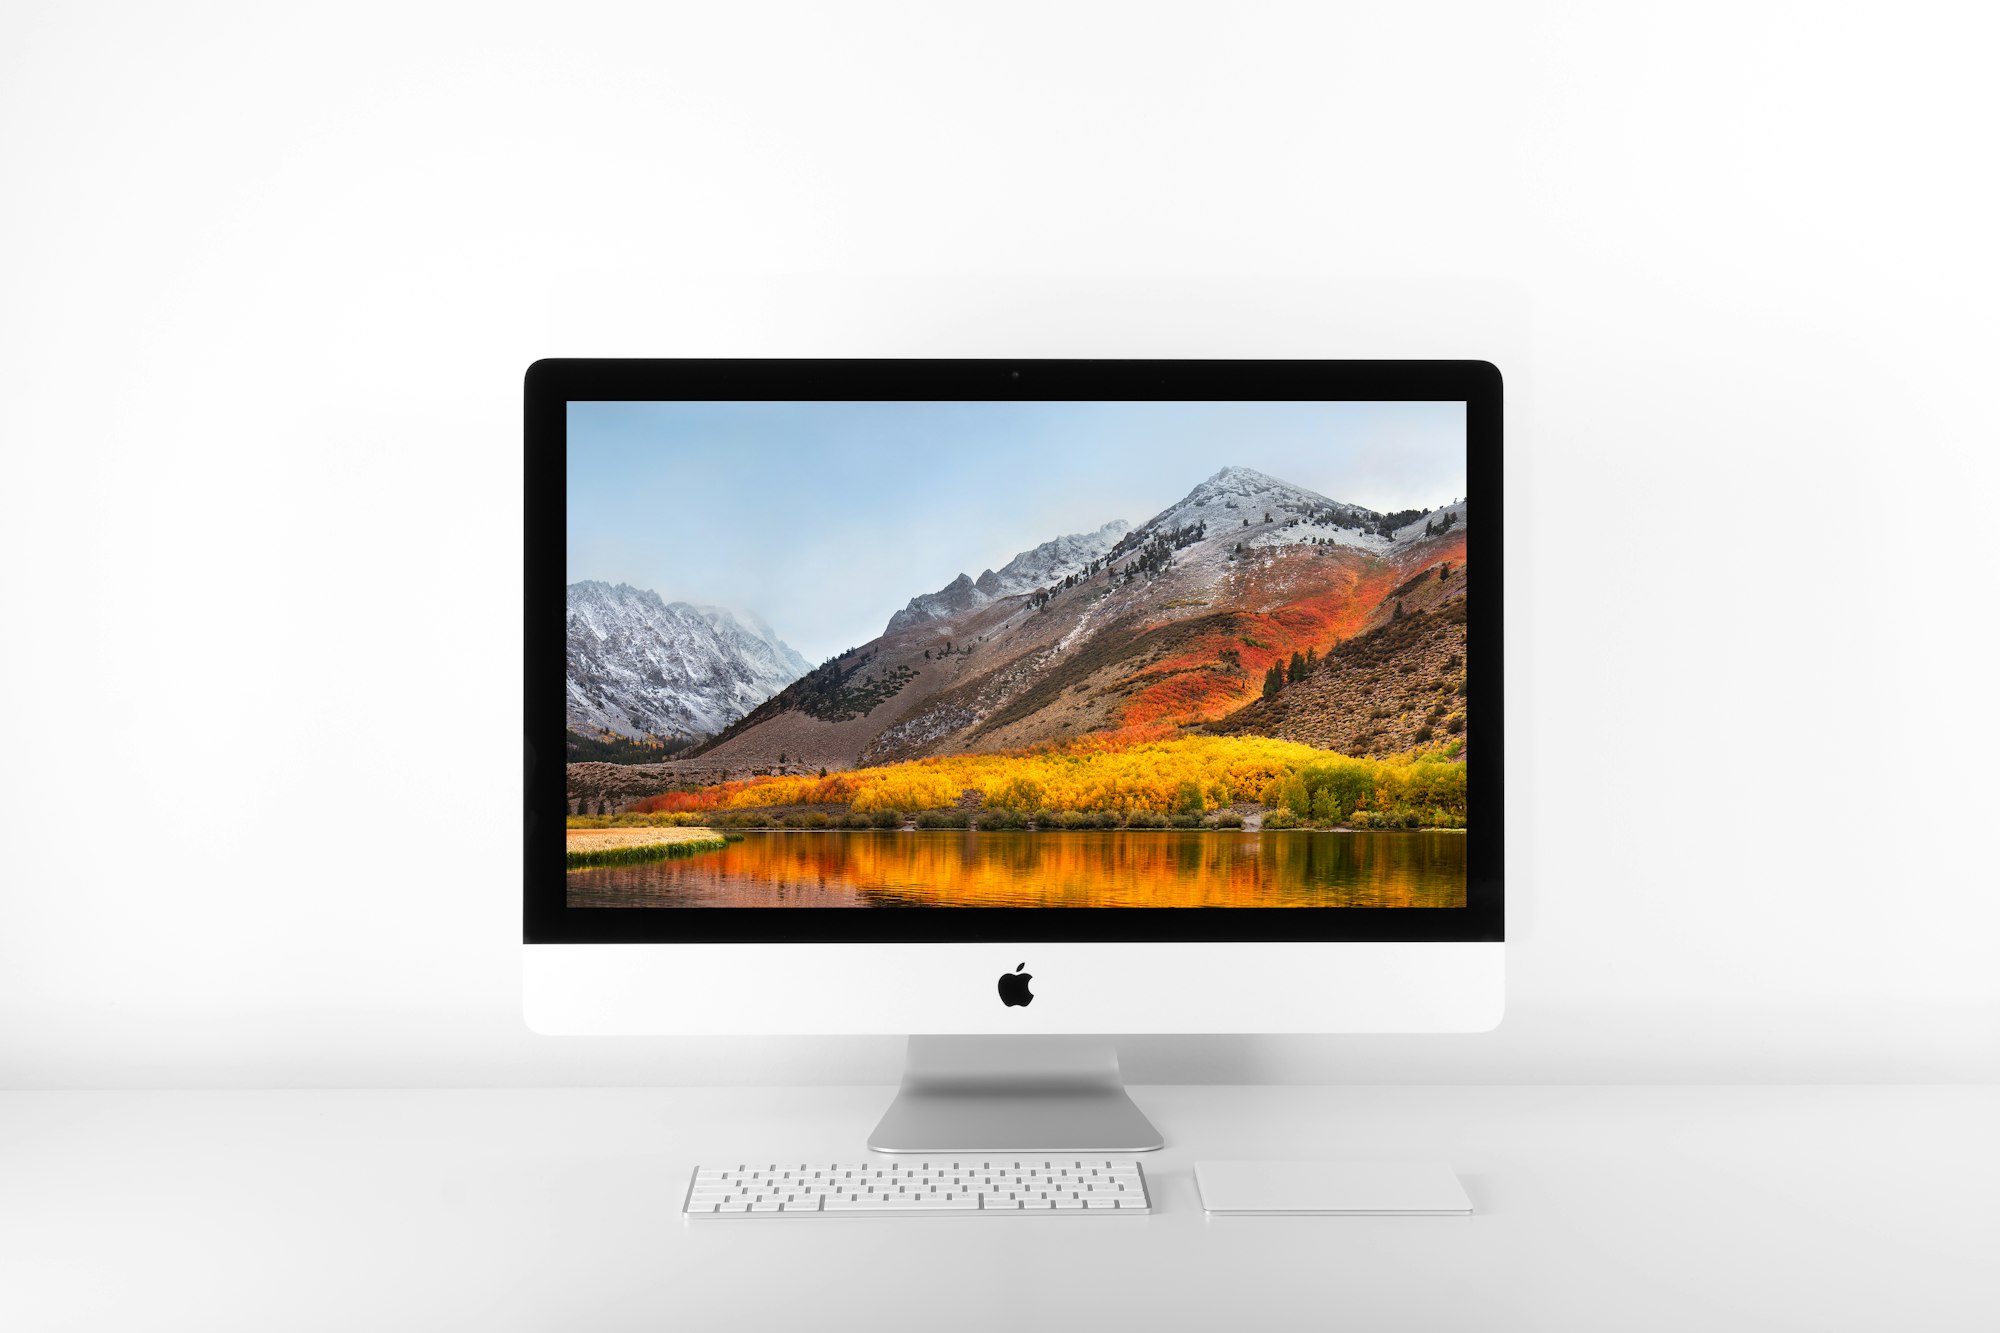 A dekstop iMac with a keyboard and trackpack on the desk in front. A lake and mountain picture is on the screen.